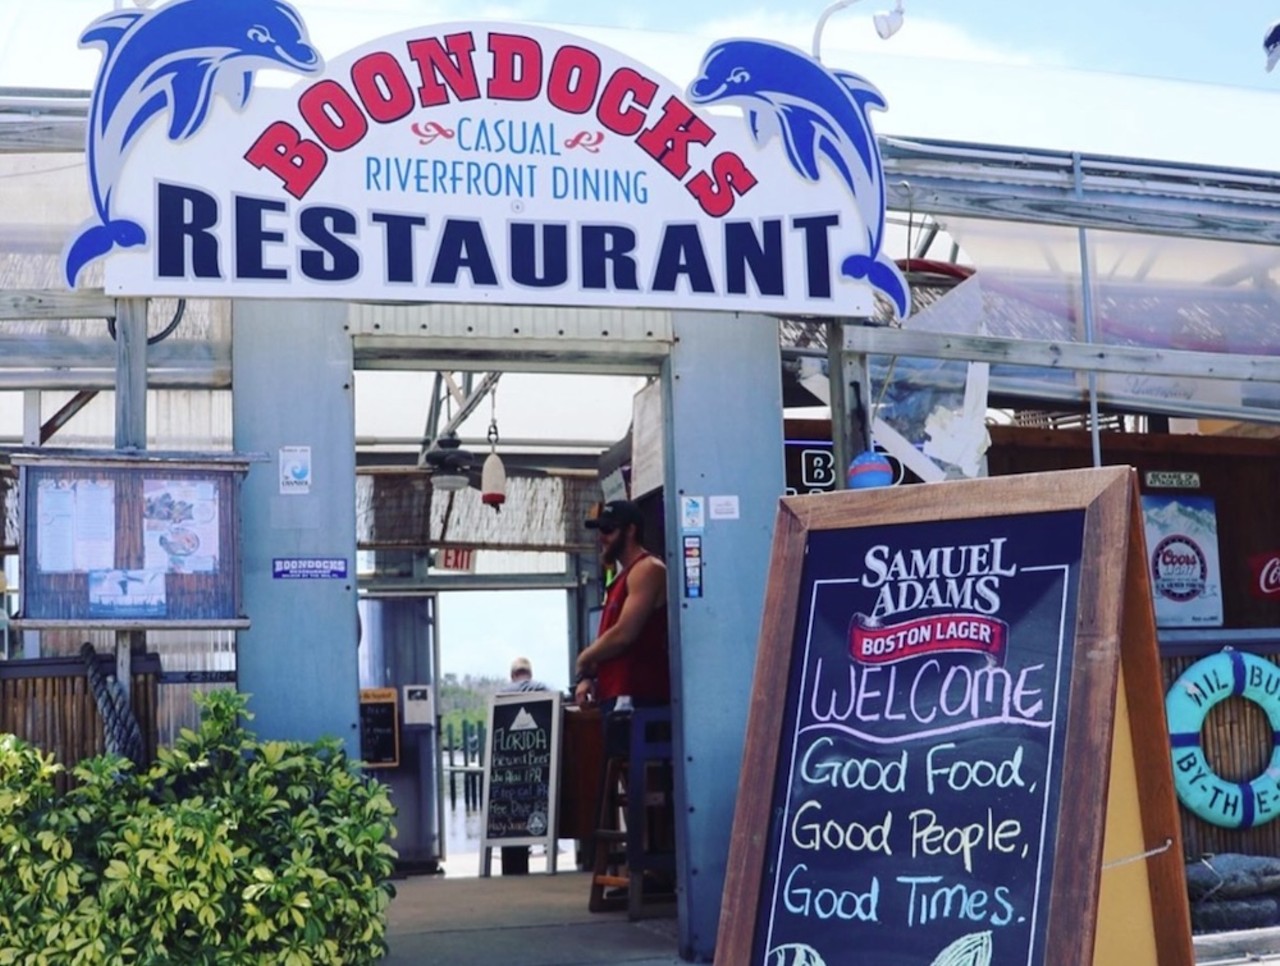 Boondocks Restaurant
704 S. Lakeshore Blvd., Howey-in-the-Hills
Located along the Halifax River in Port Orange, Boondocks Restaurant's guests can enjoy quality seafood, riverside views and a pet-friendly patio.